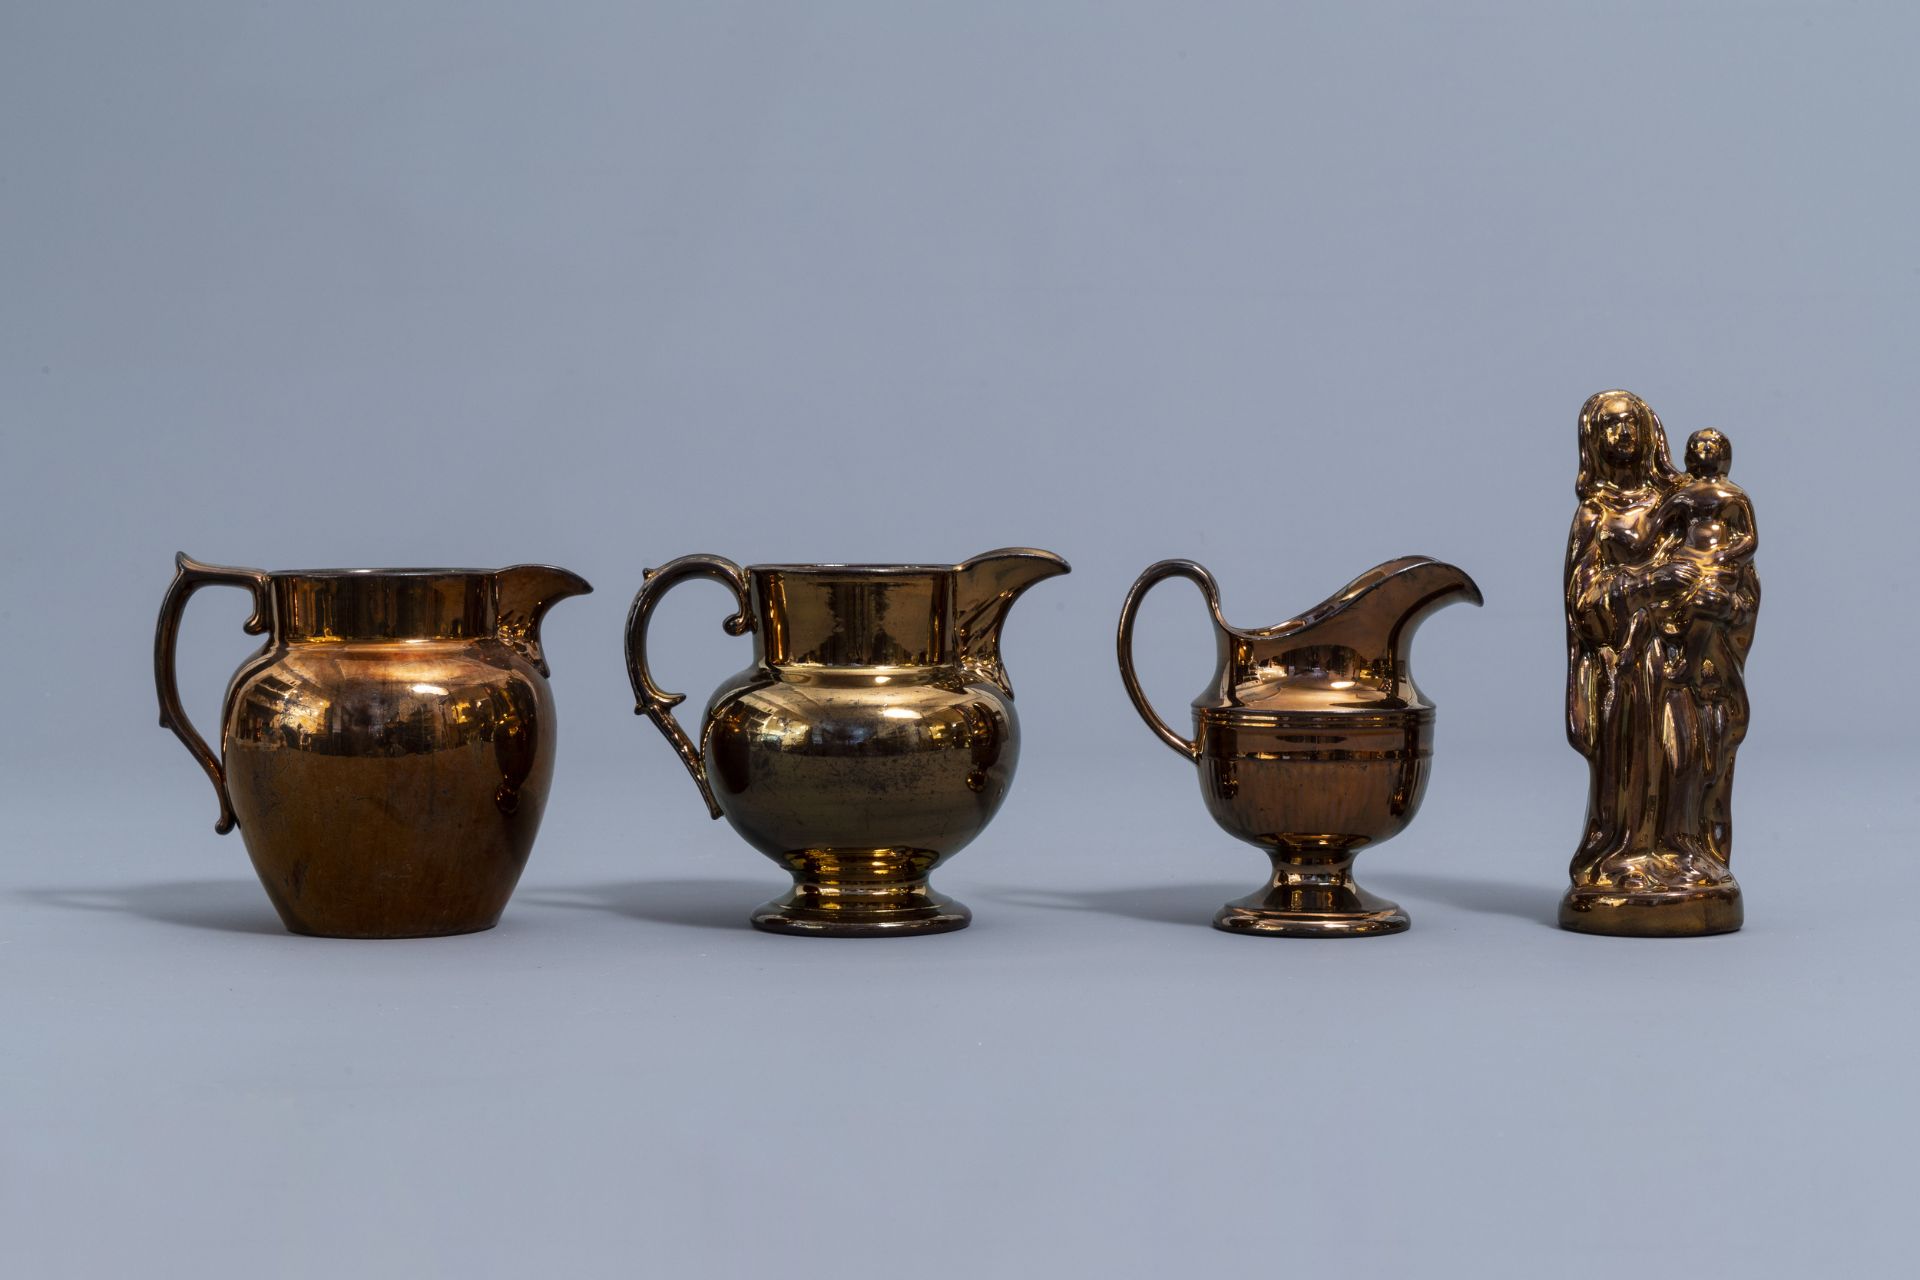 A varied collection of English monochrome copper lustreware items, 19th C. - Image 27 of 50